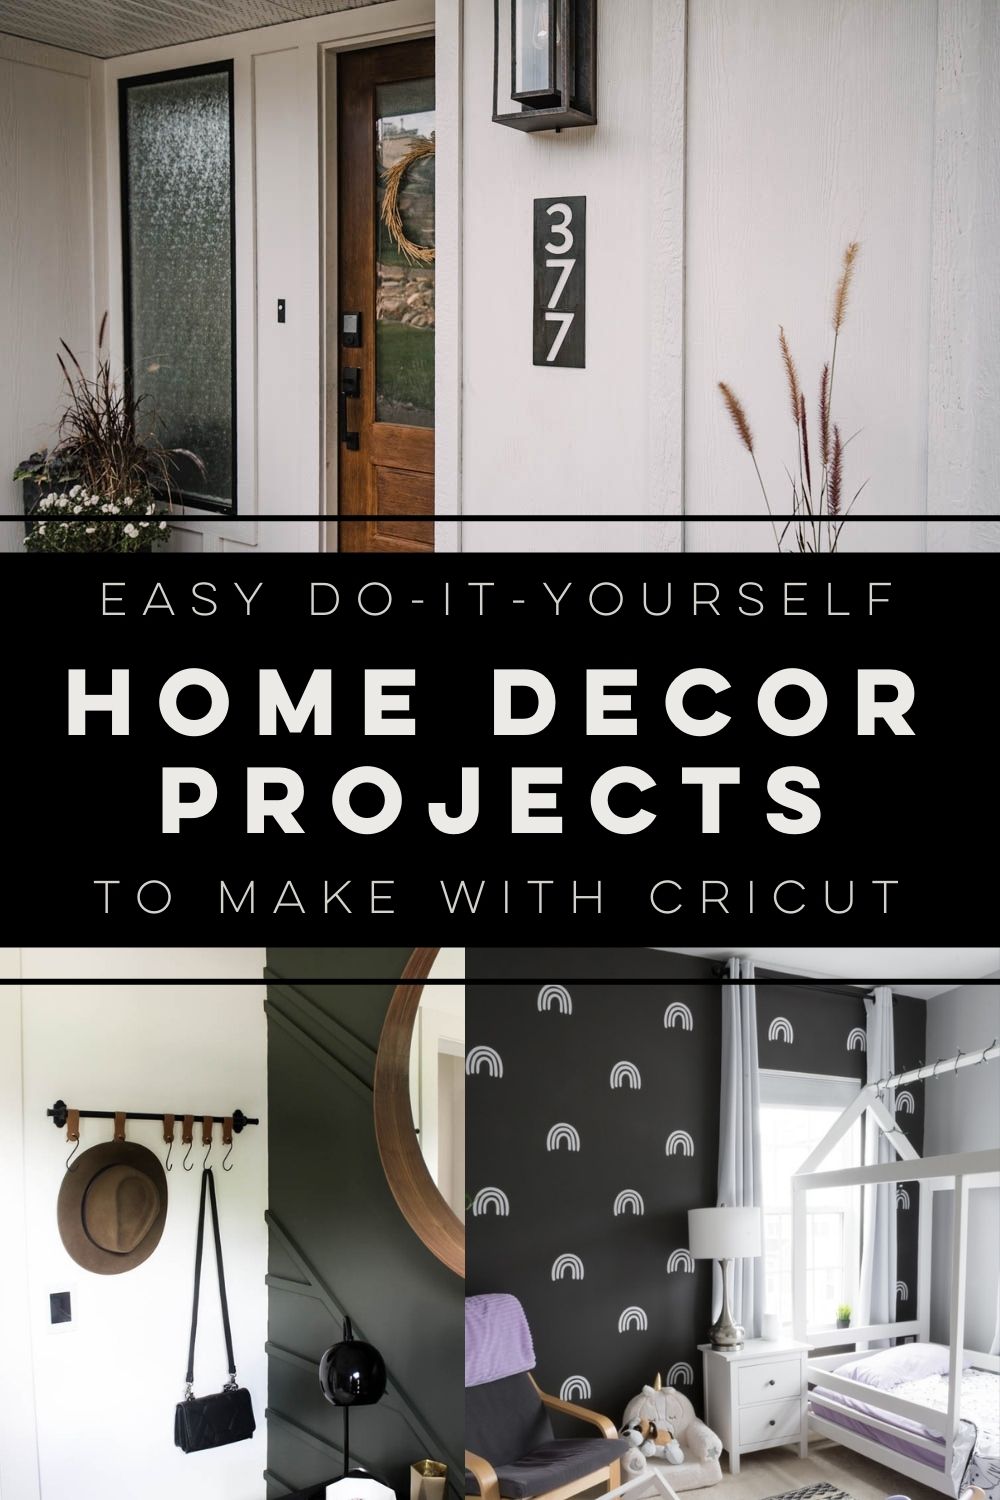 Collage image with text overlay: easy do-it-yourself home decor projects to make with cricut